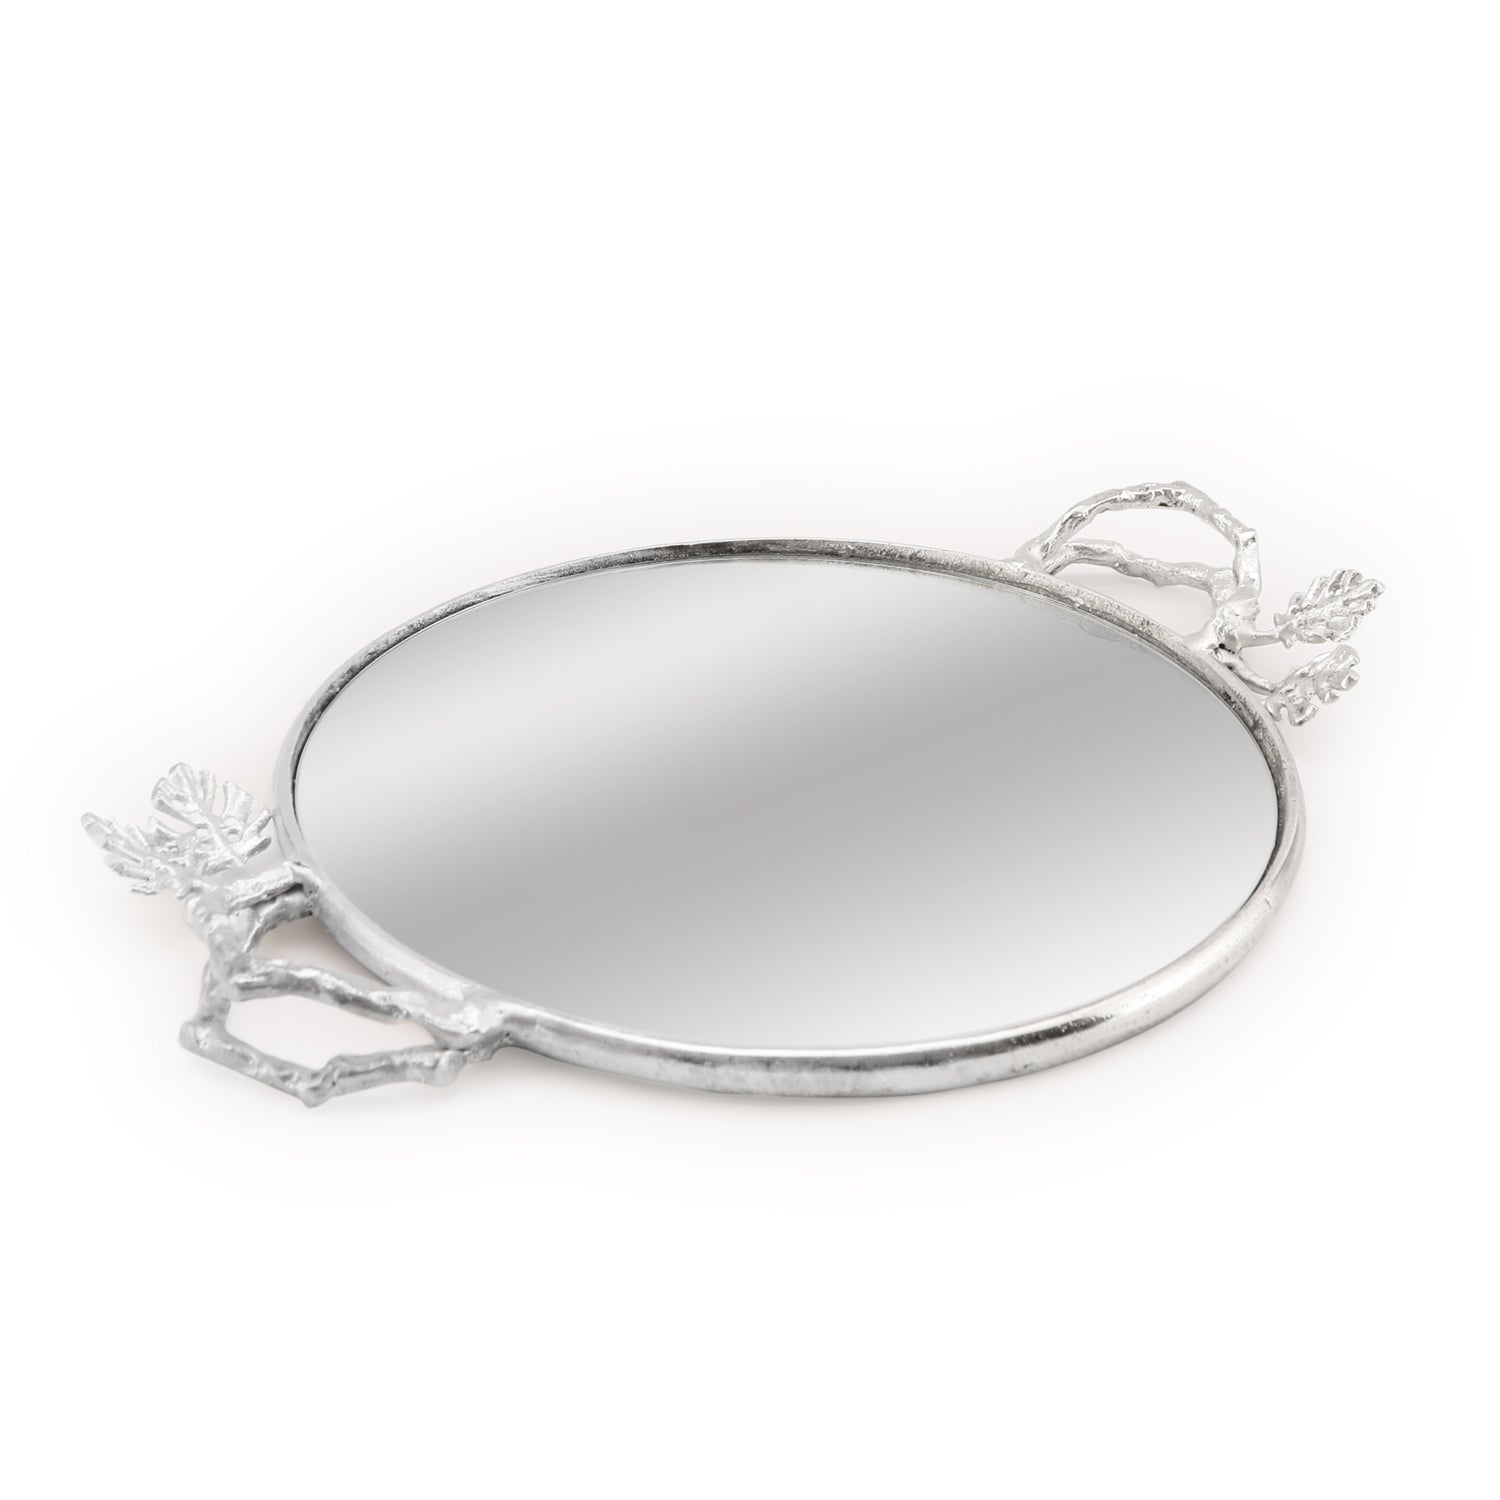 Mirror Tray - Silver Leaf 1- The Home Co.